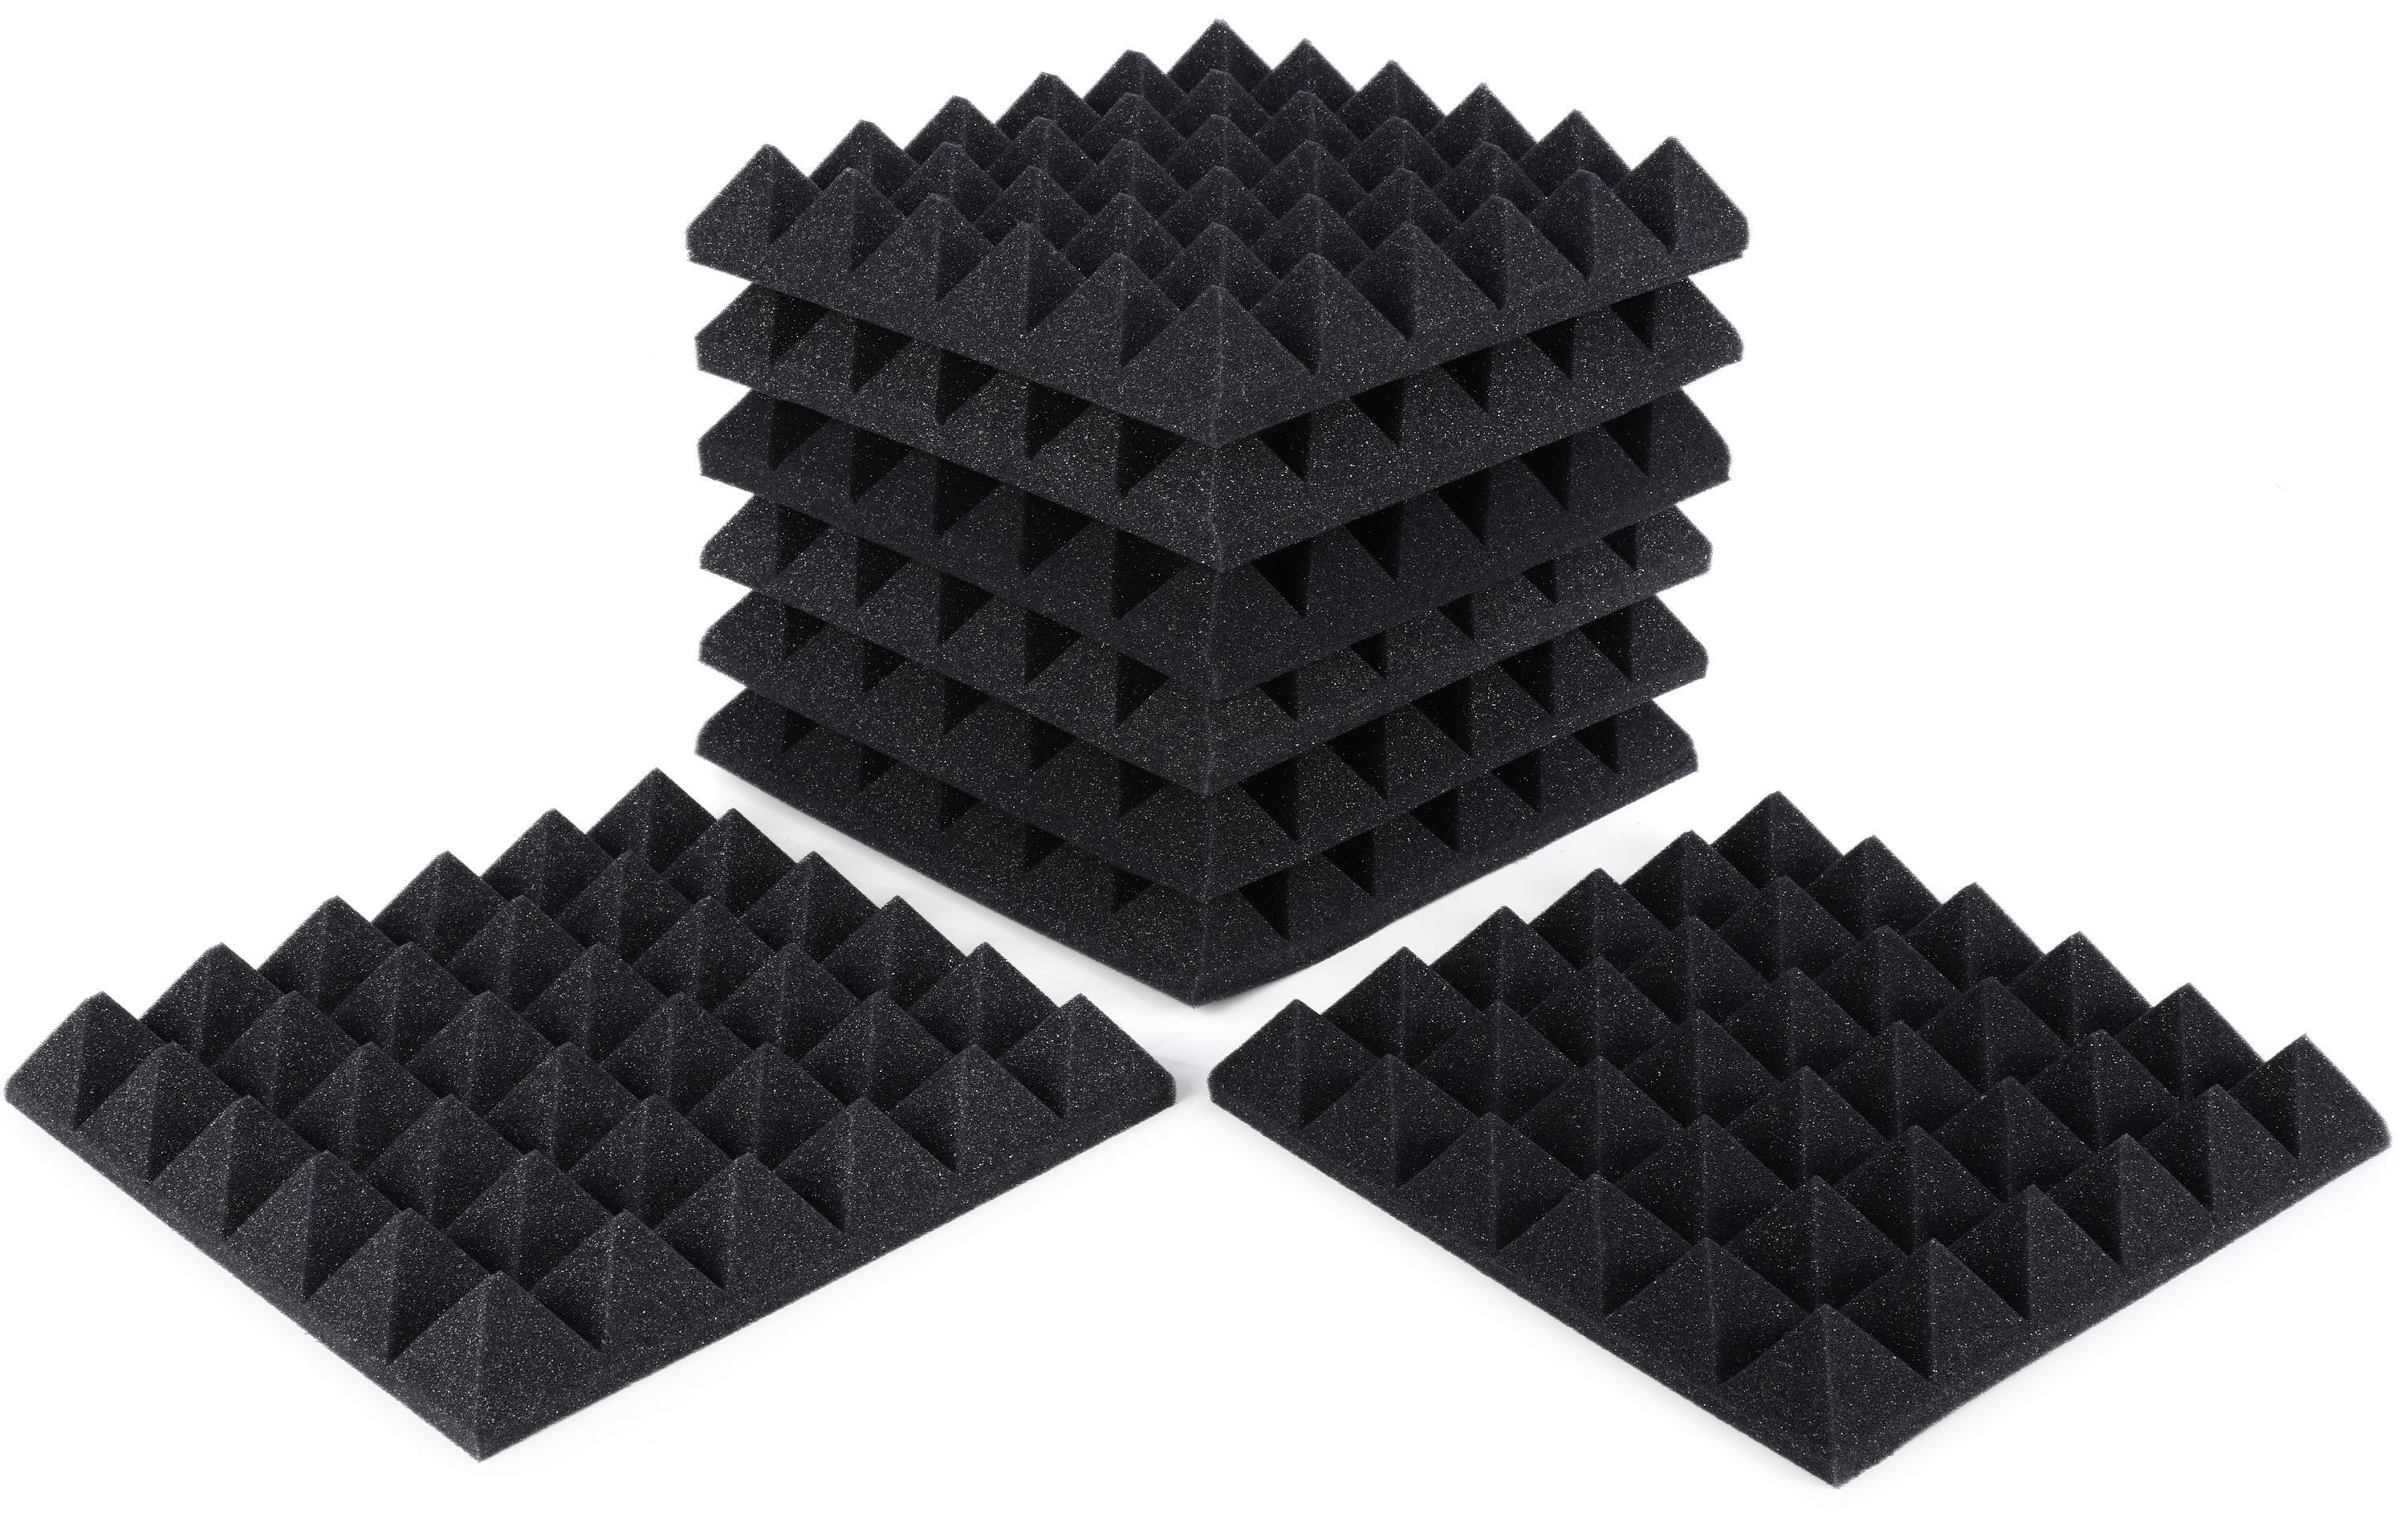 Gator 8-pack of Charcoal 12-inch x 12-inch Acoustic Pyramid Panel ...